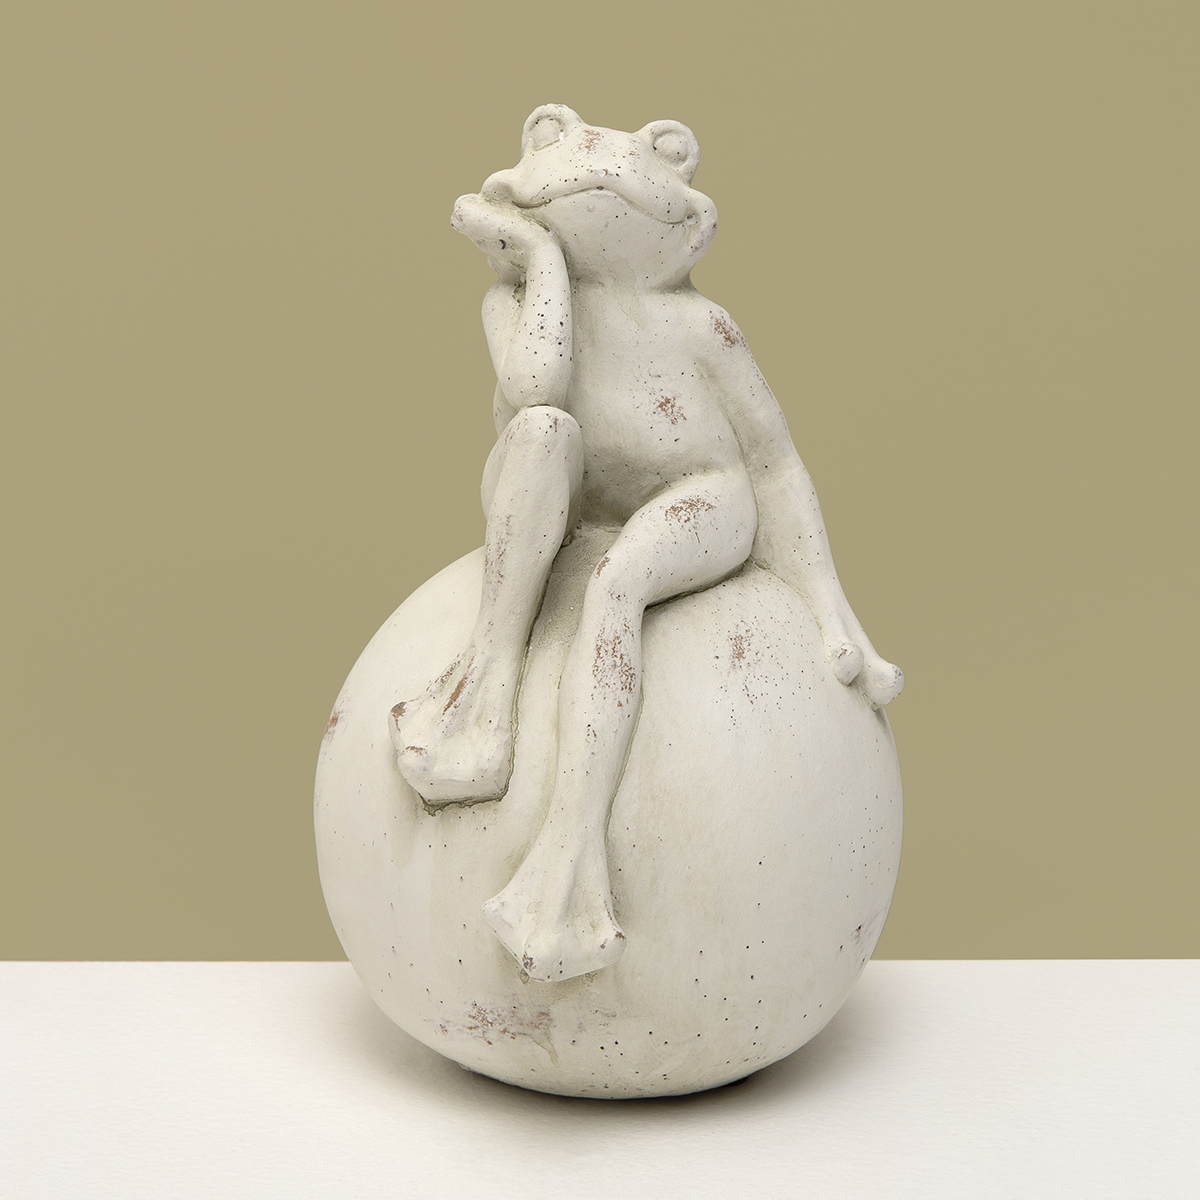 FROG ON BALL THINKING 5.5IN X 5IN X 7.5IN WHITE WASH CONCRETE